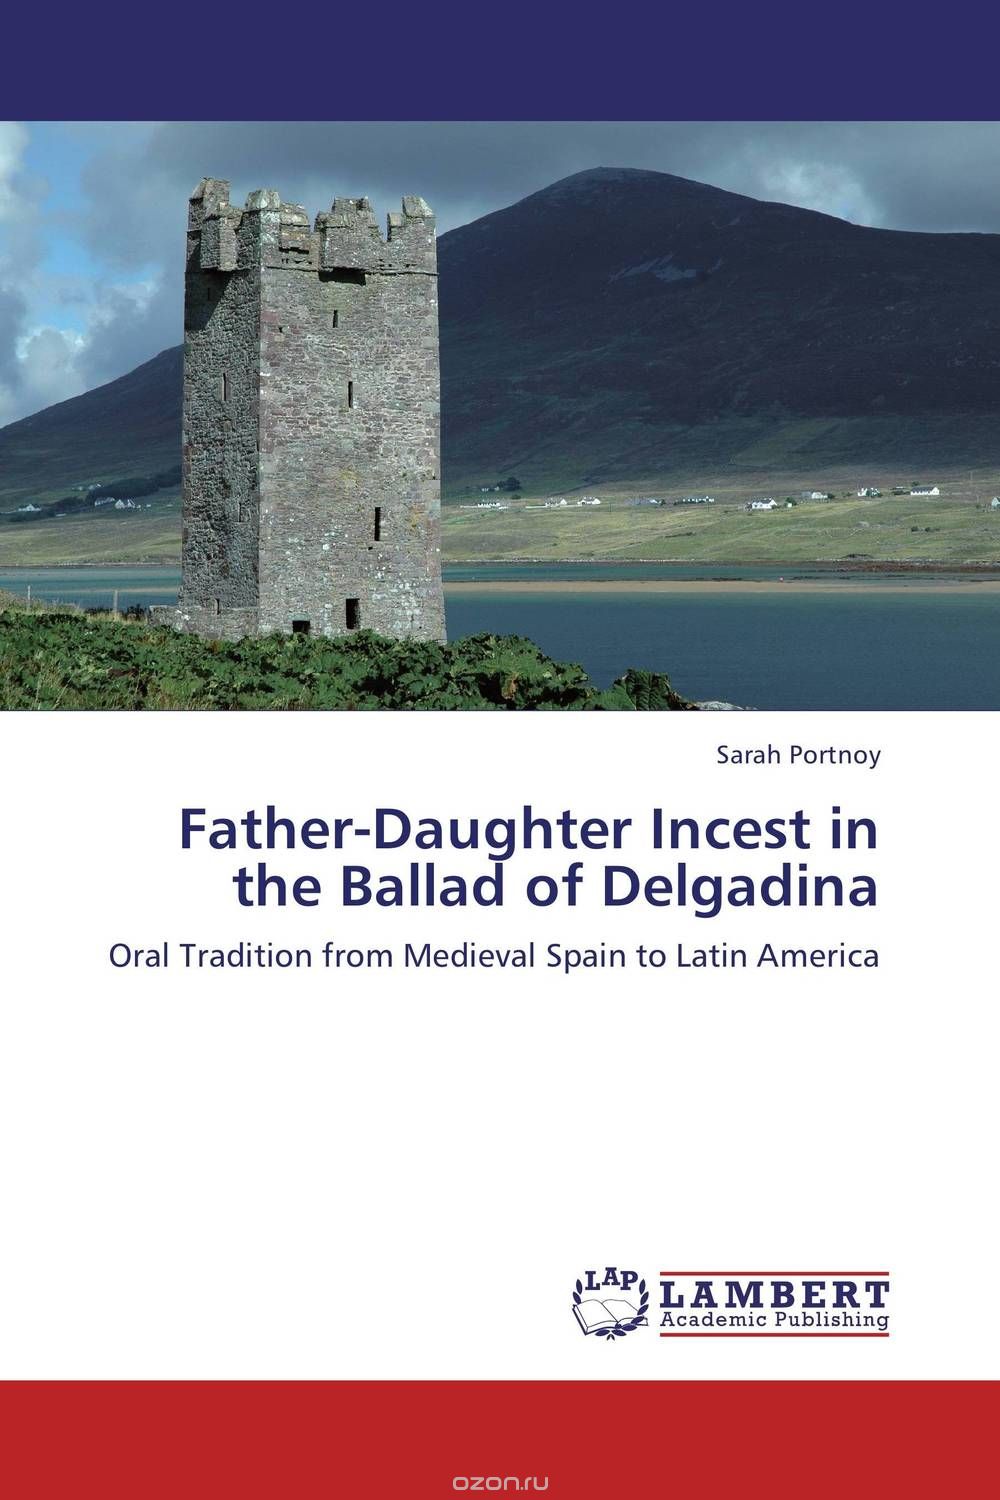 Father-Daughter Incest in the Ballad of Delgadina